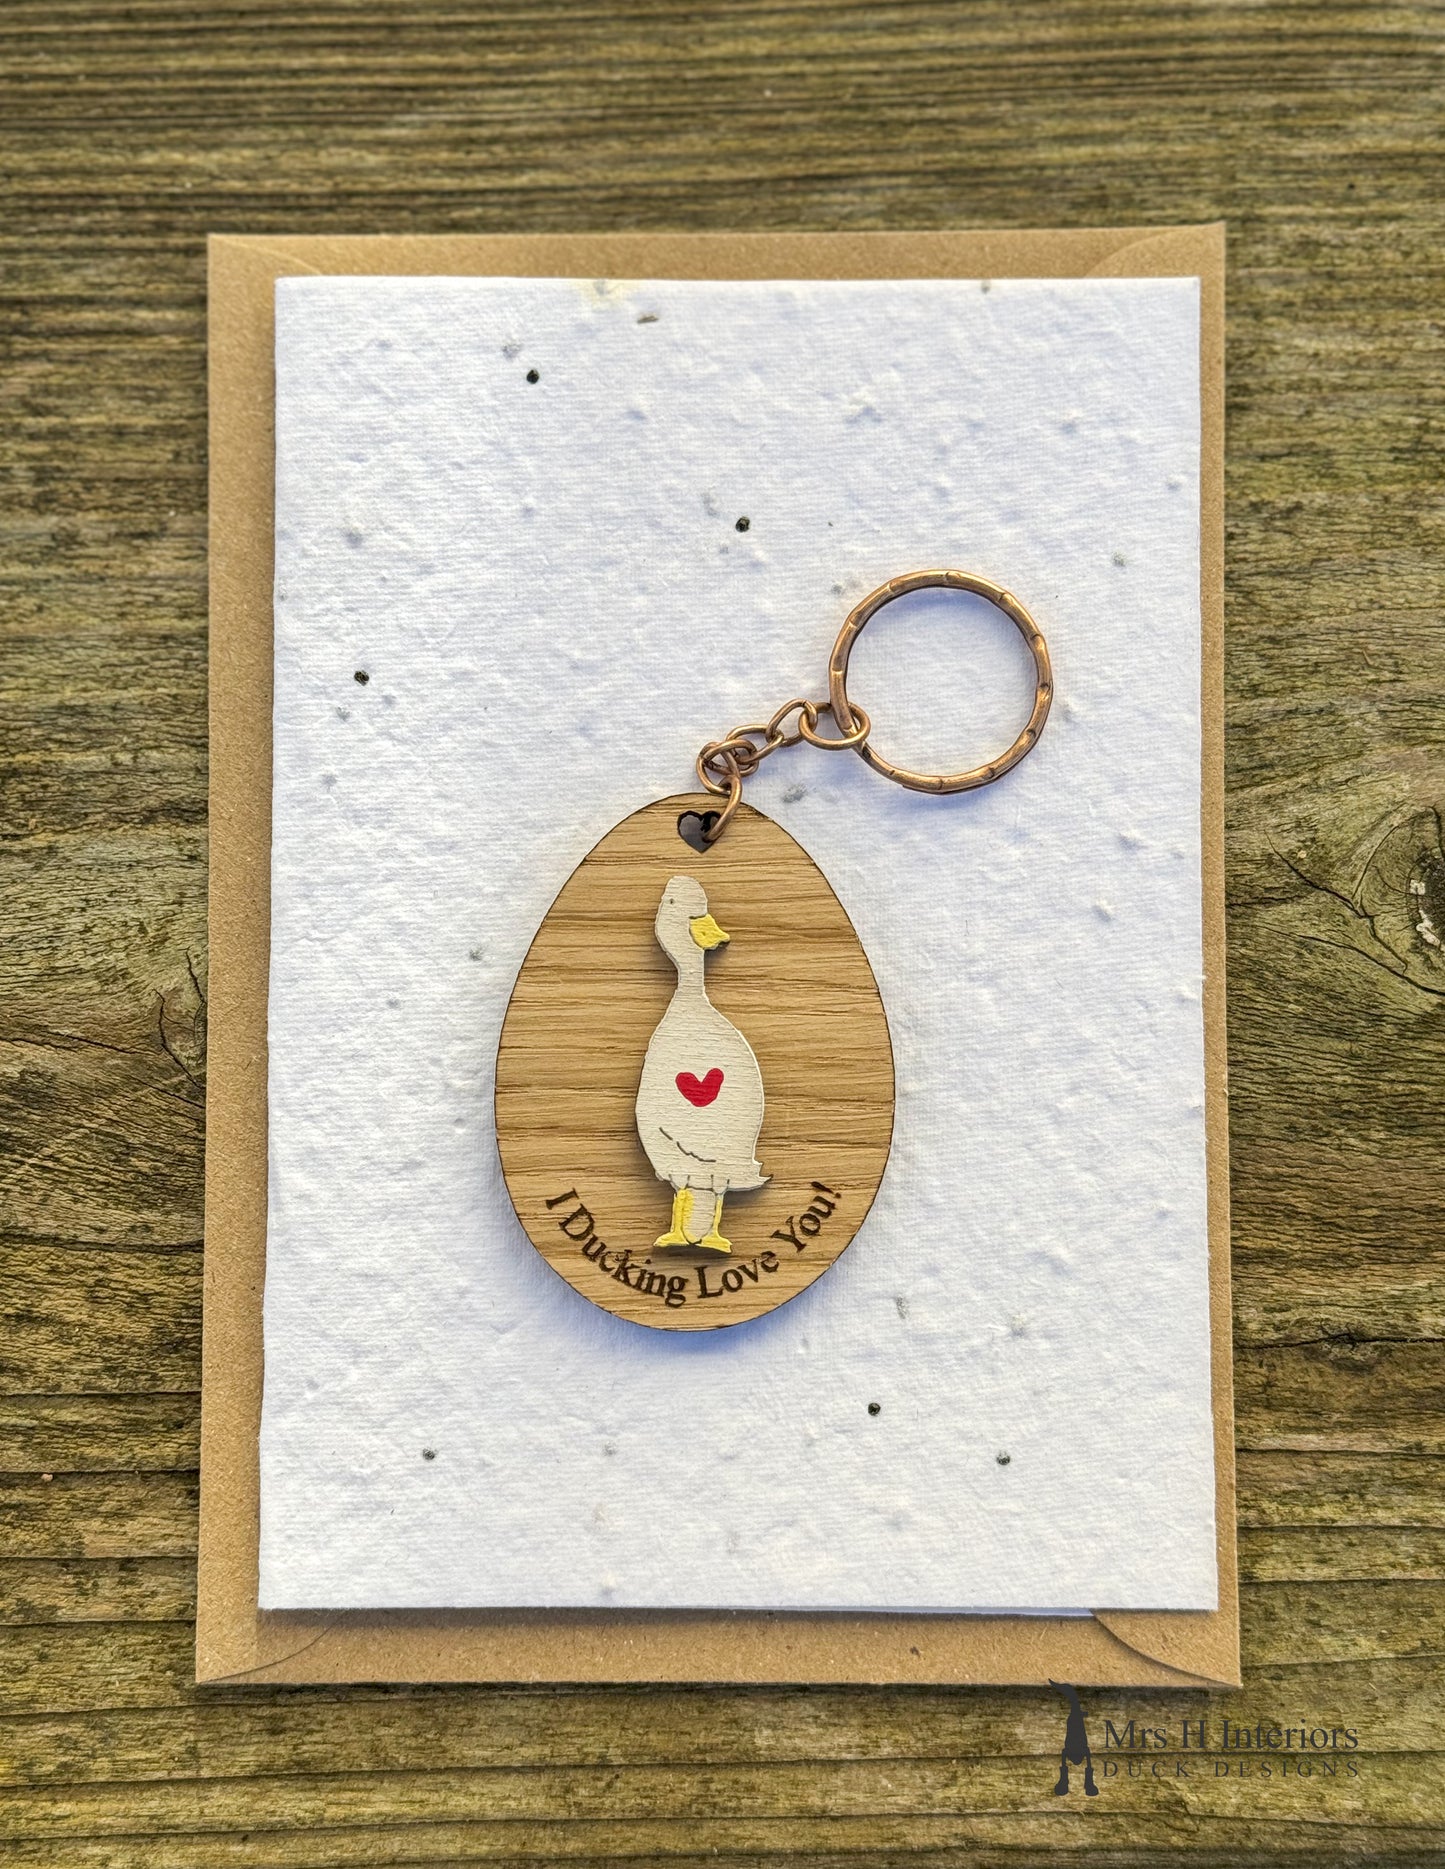 Ducking love you wooden key ring, wild flower seed paper gift card.